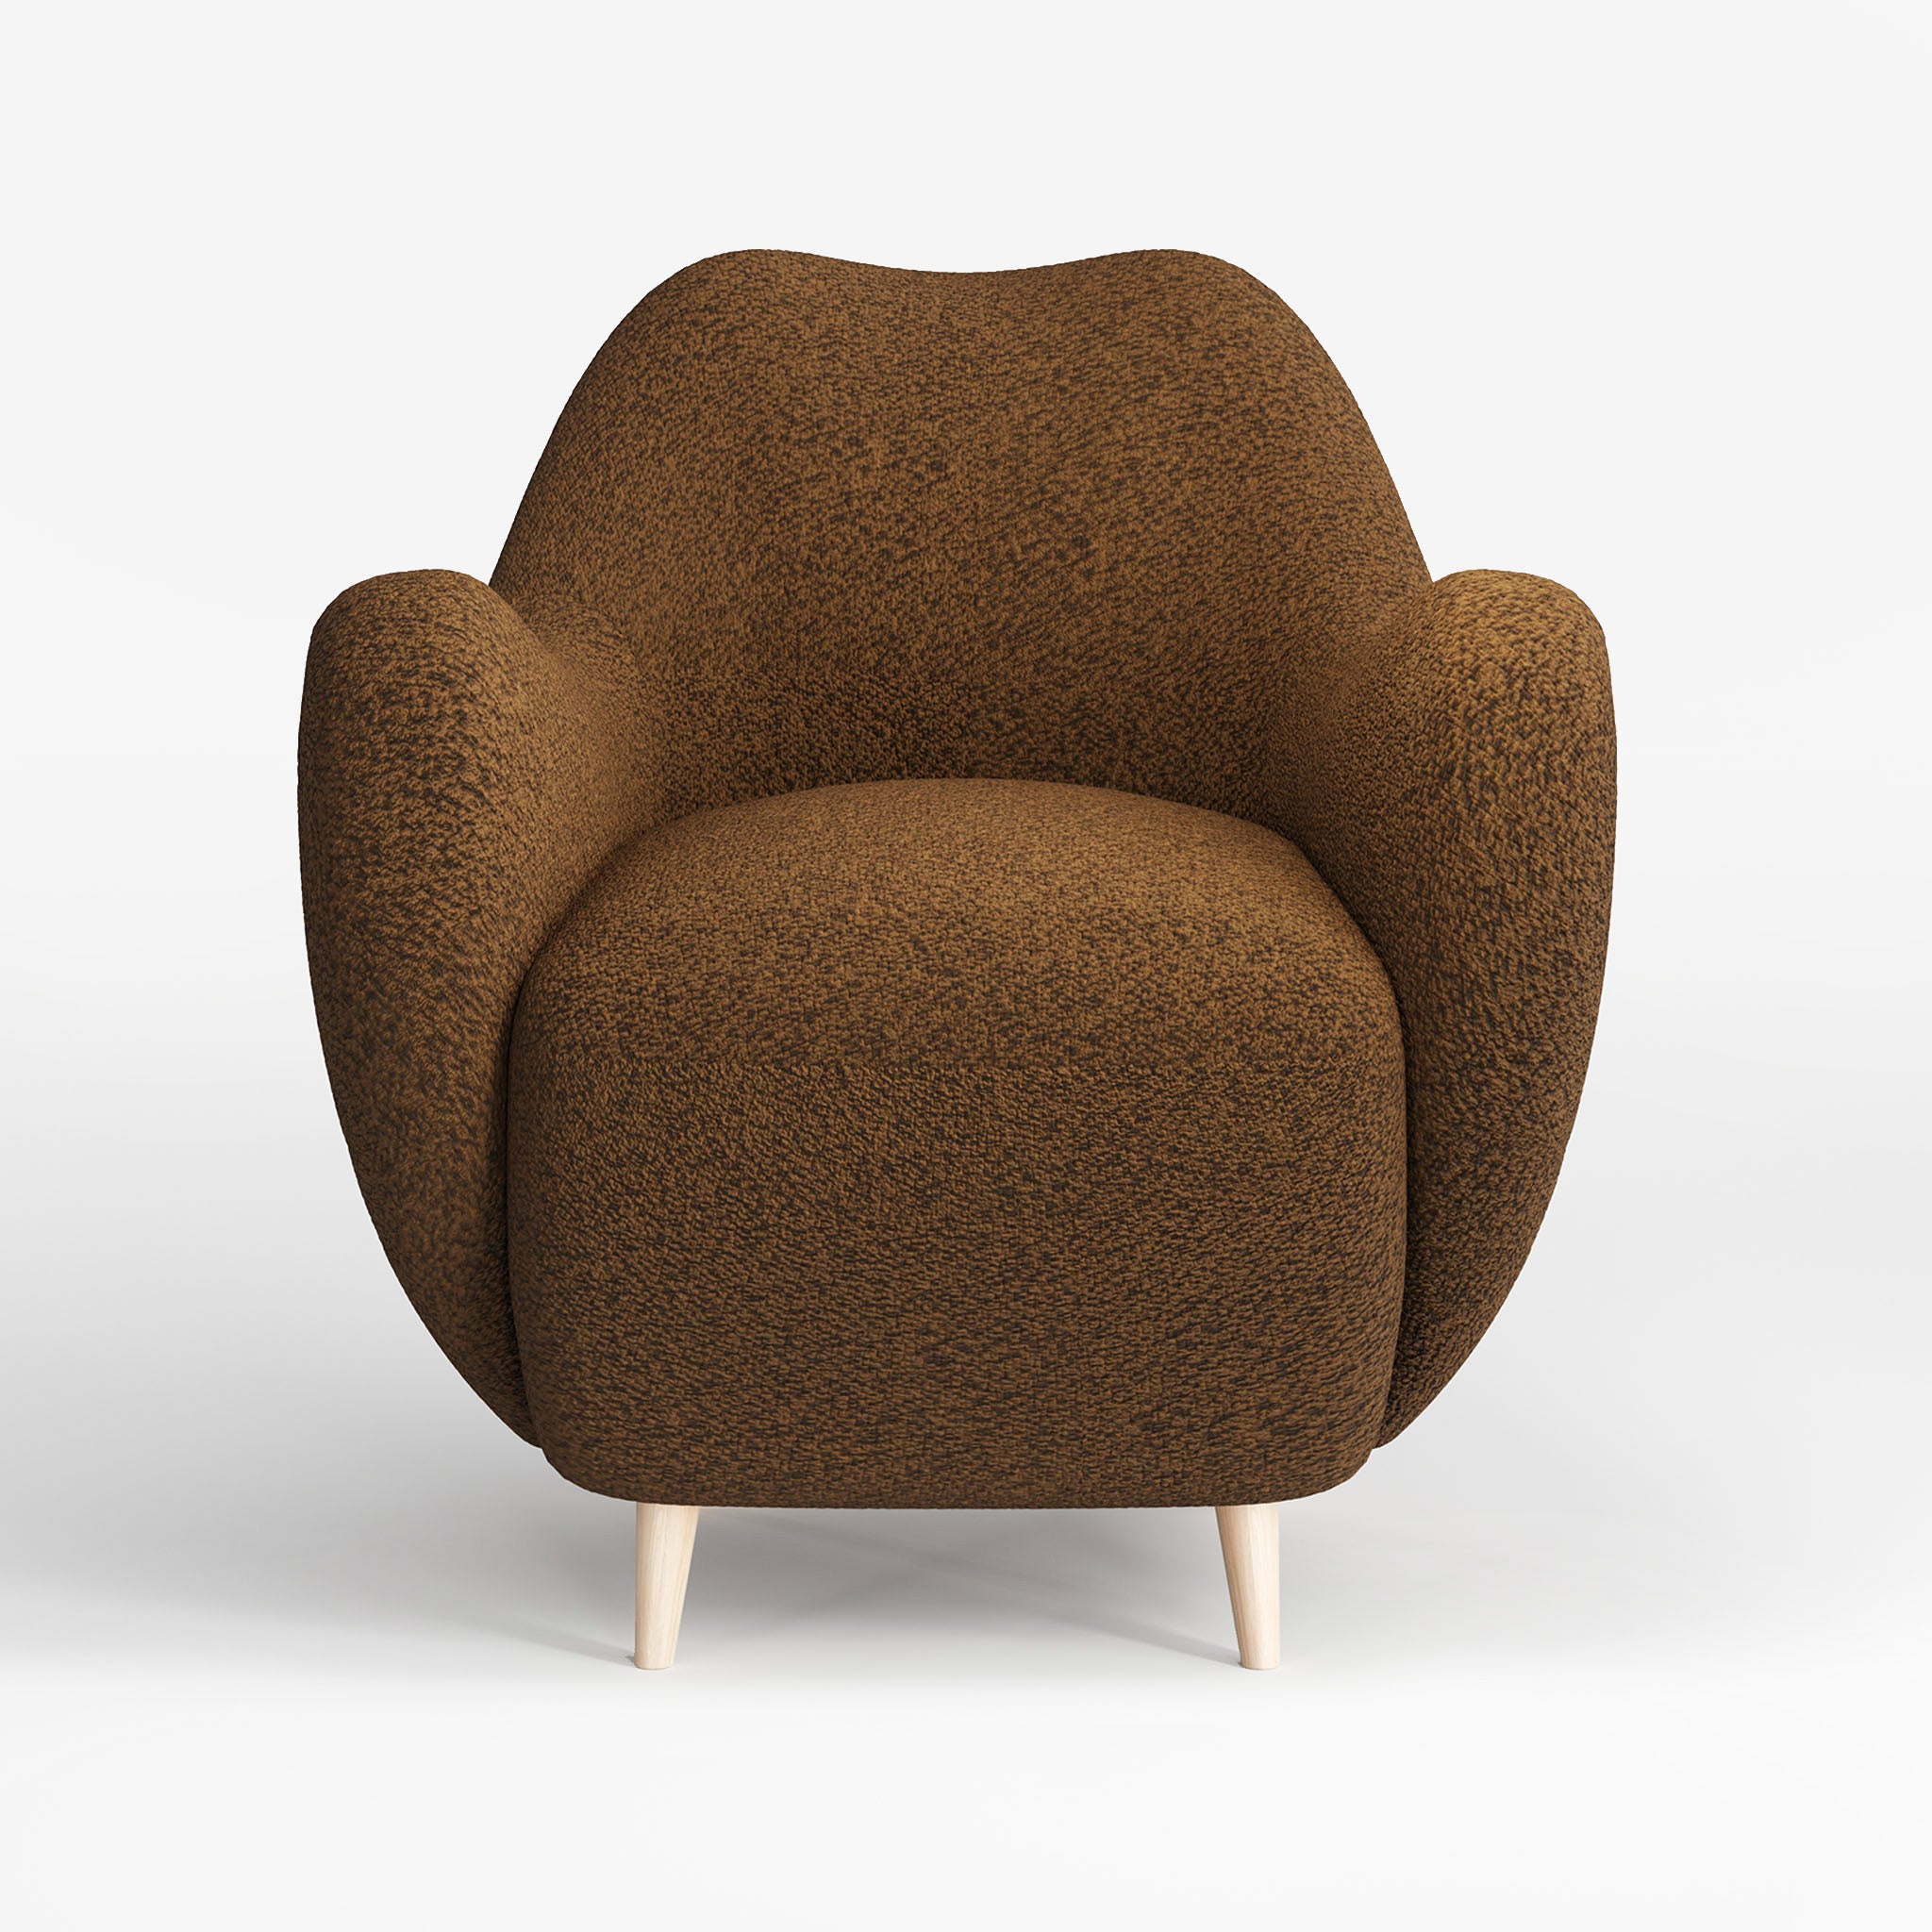 Luxury furniture, Brown Boucle Fabric Armchair, Contemporary Design, Modern Design